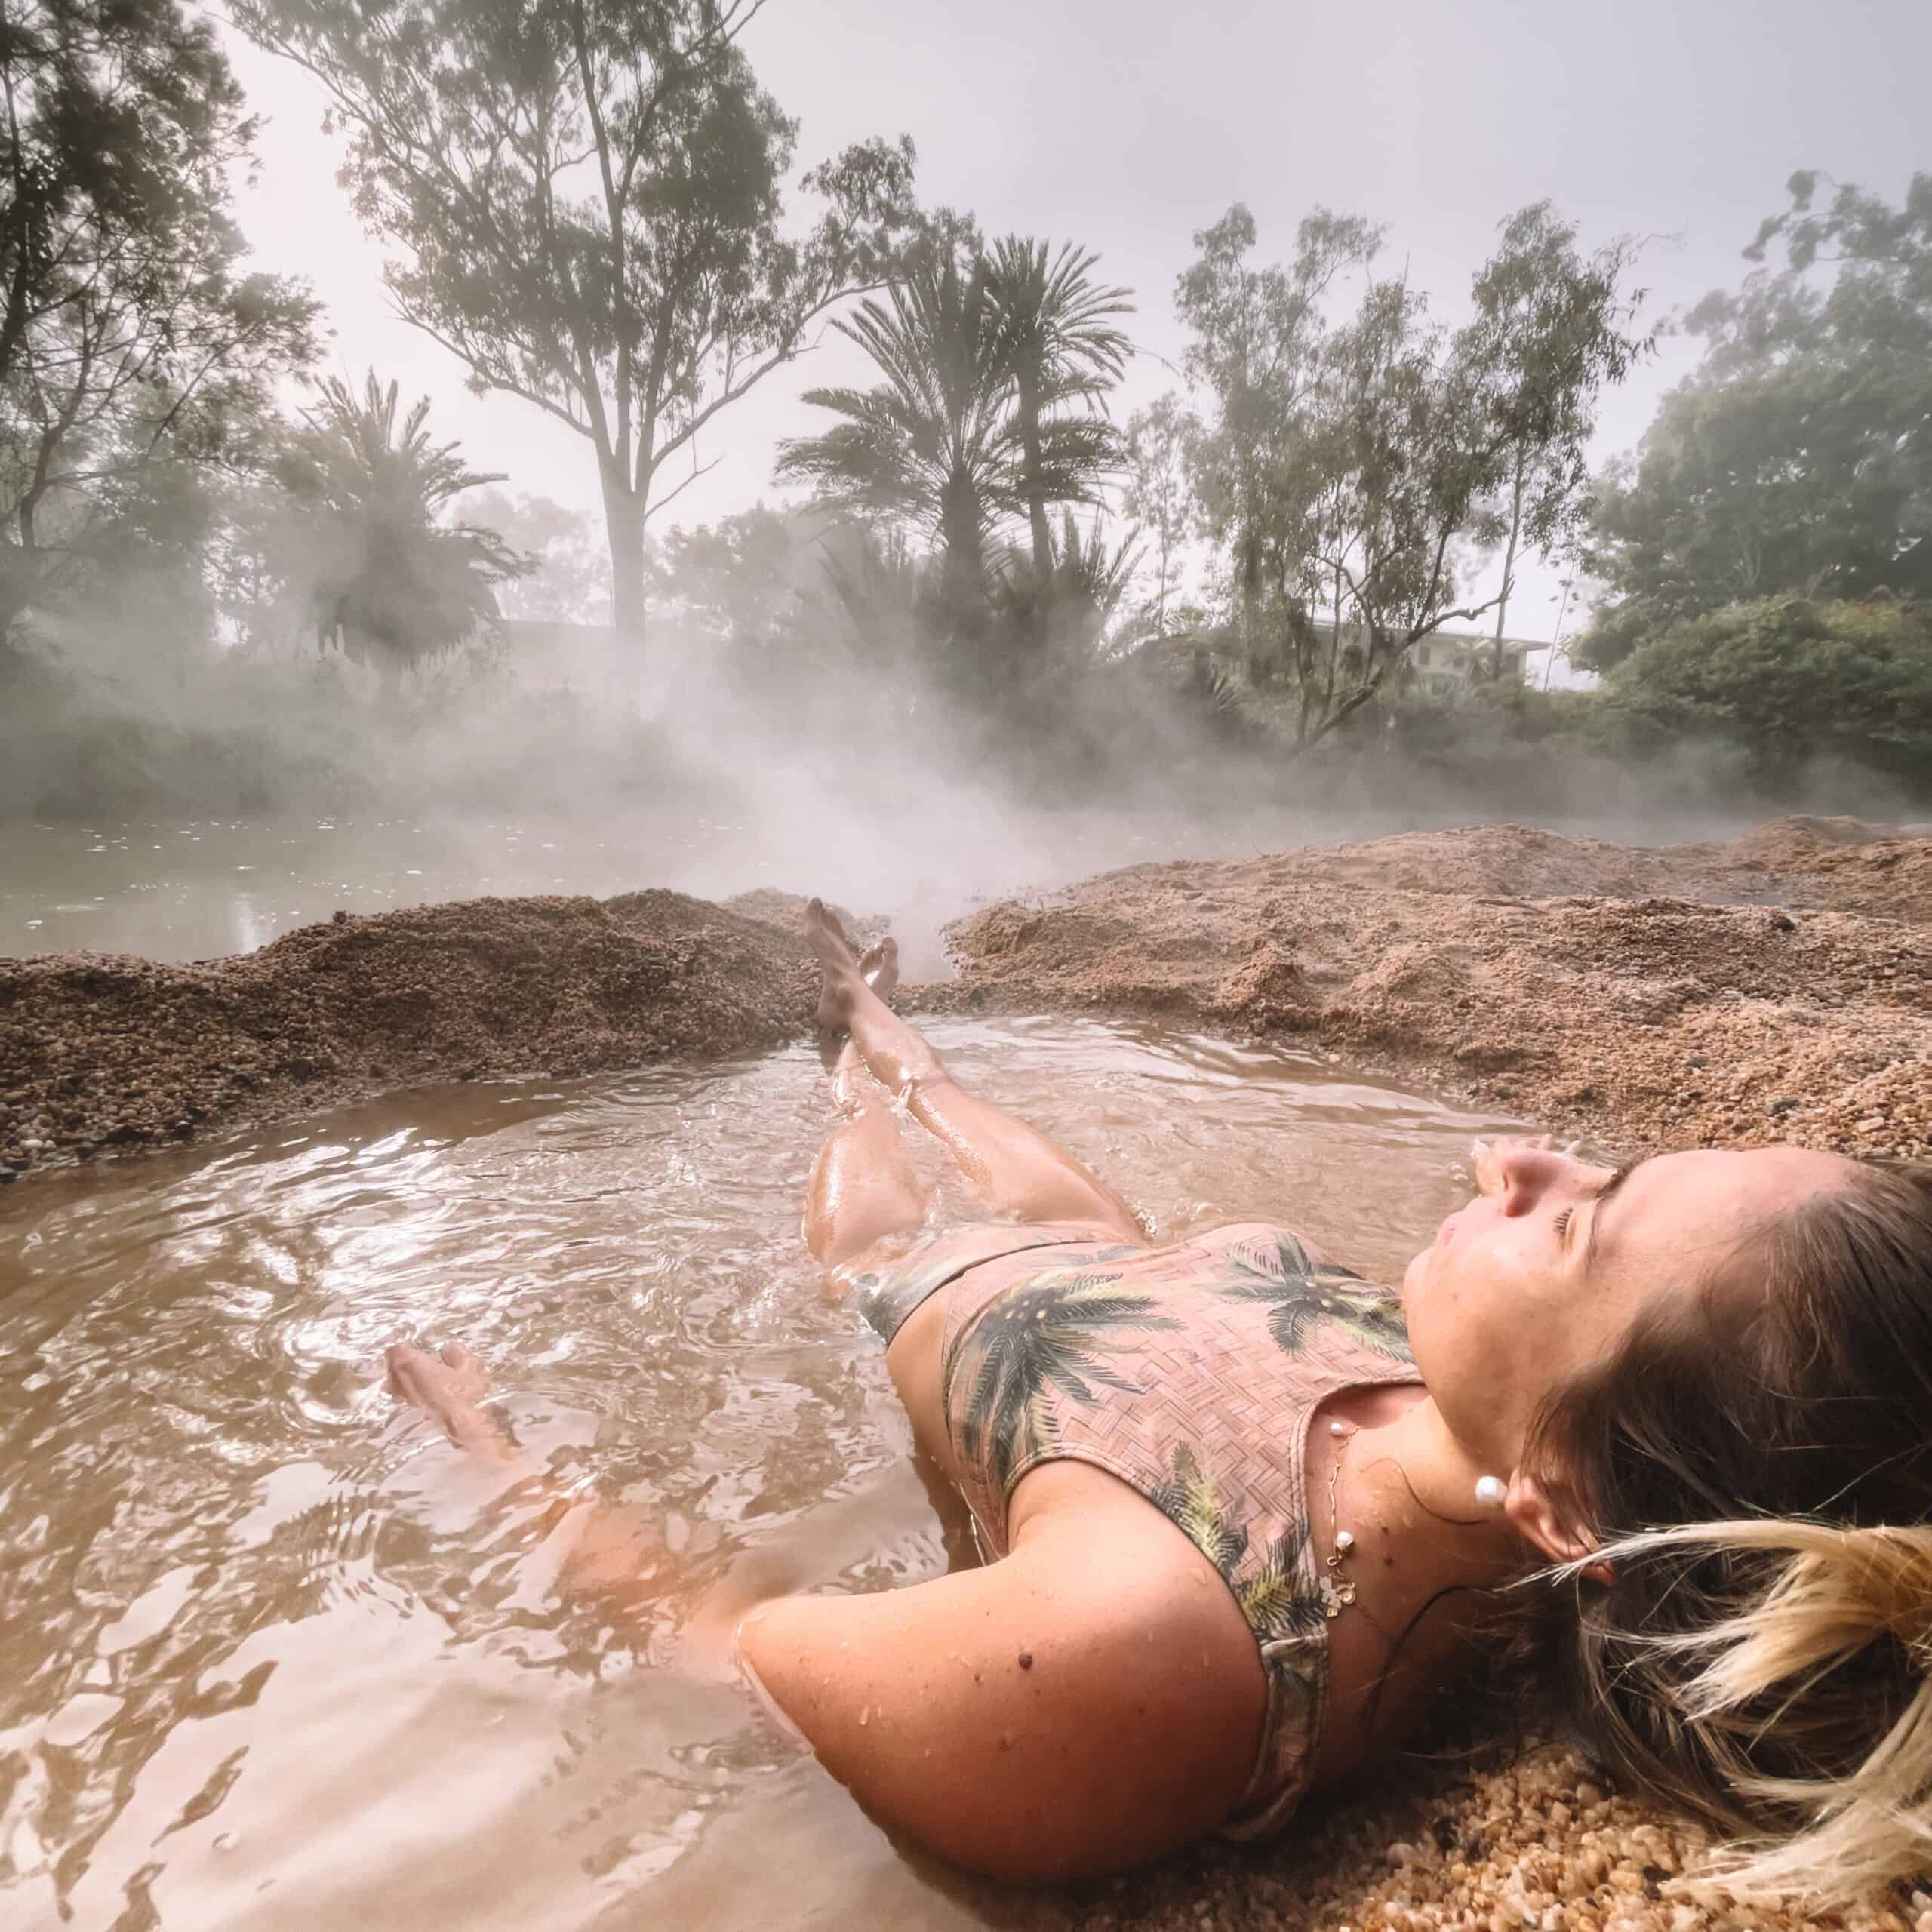 Dani in the water at Innot hot springs qld